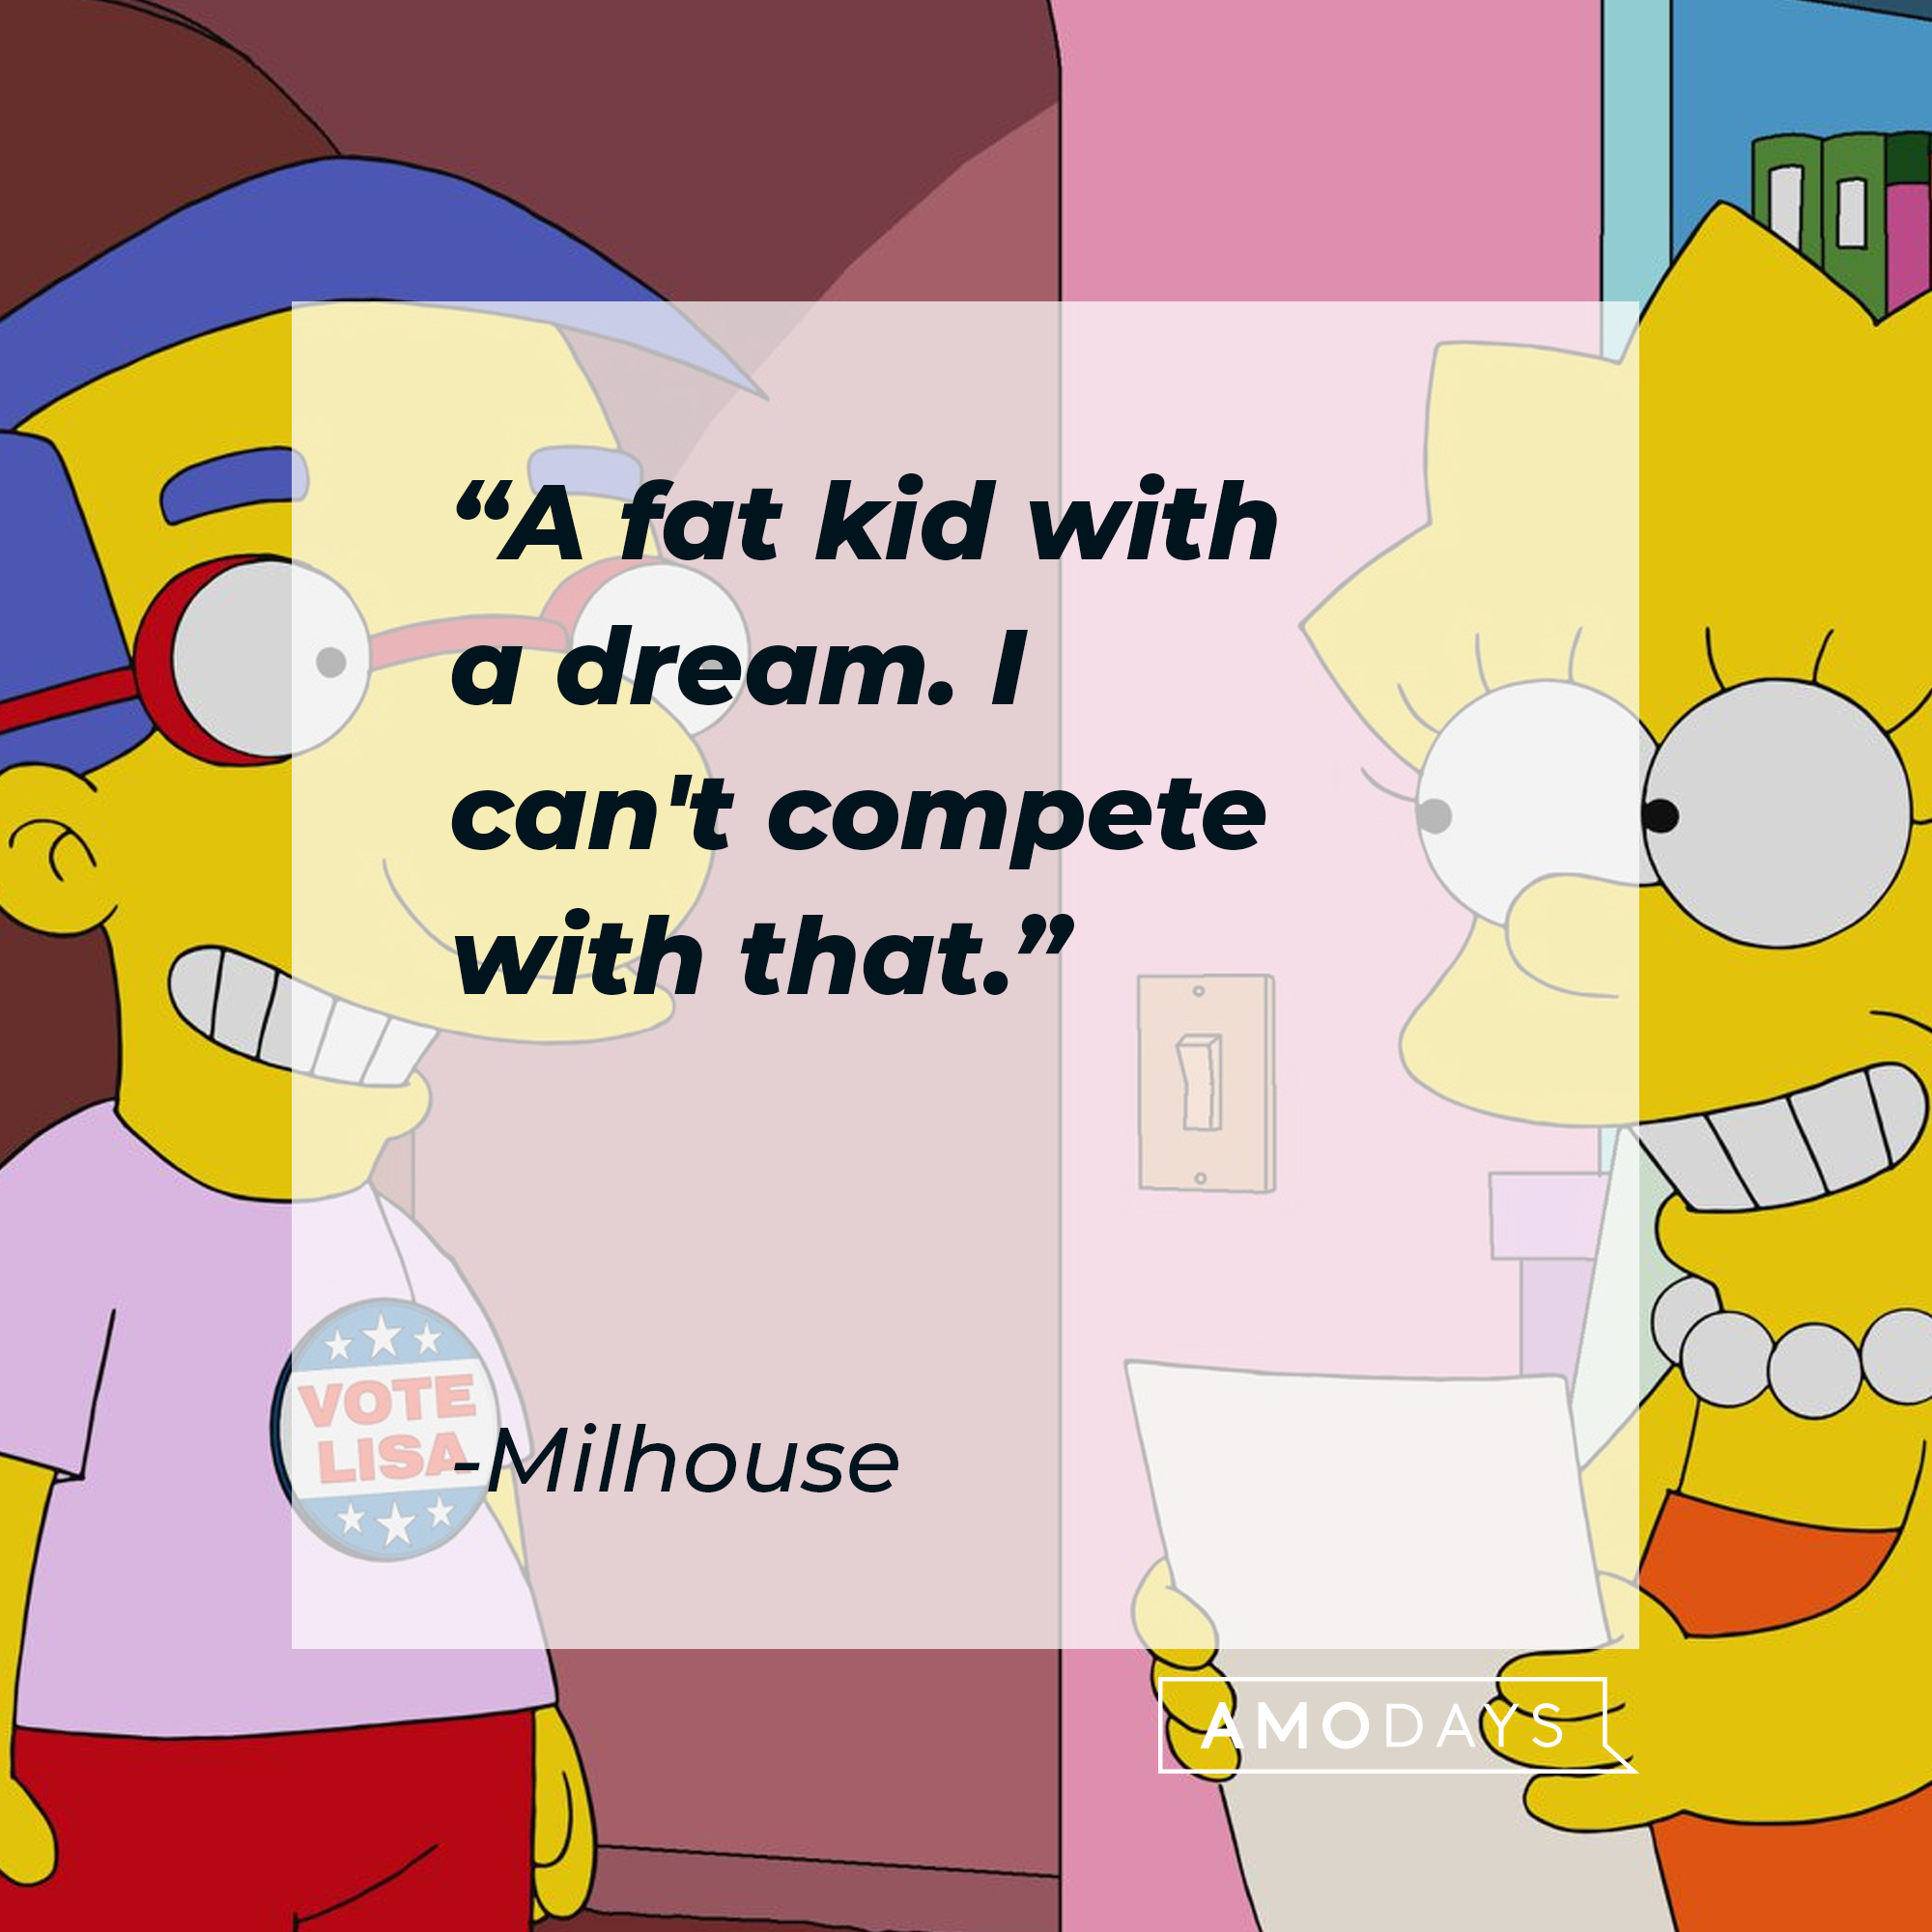 Bart Simpson and Milhouse, with Milhouse's quote: “A fat kid with a dream. I can't compete with that.” | Source: facebook.com/TheSimpsons